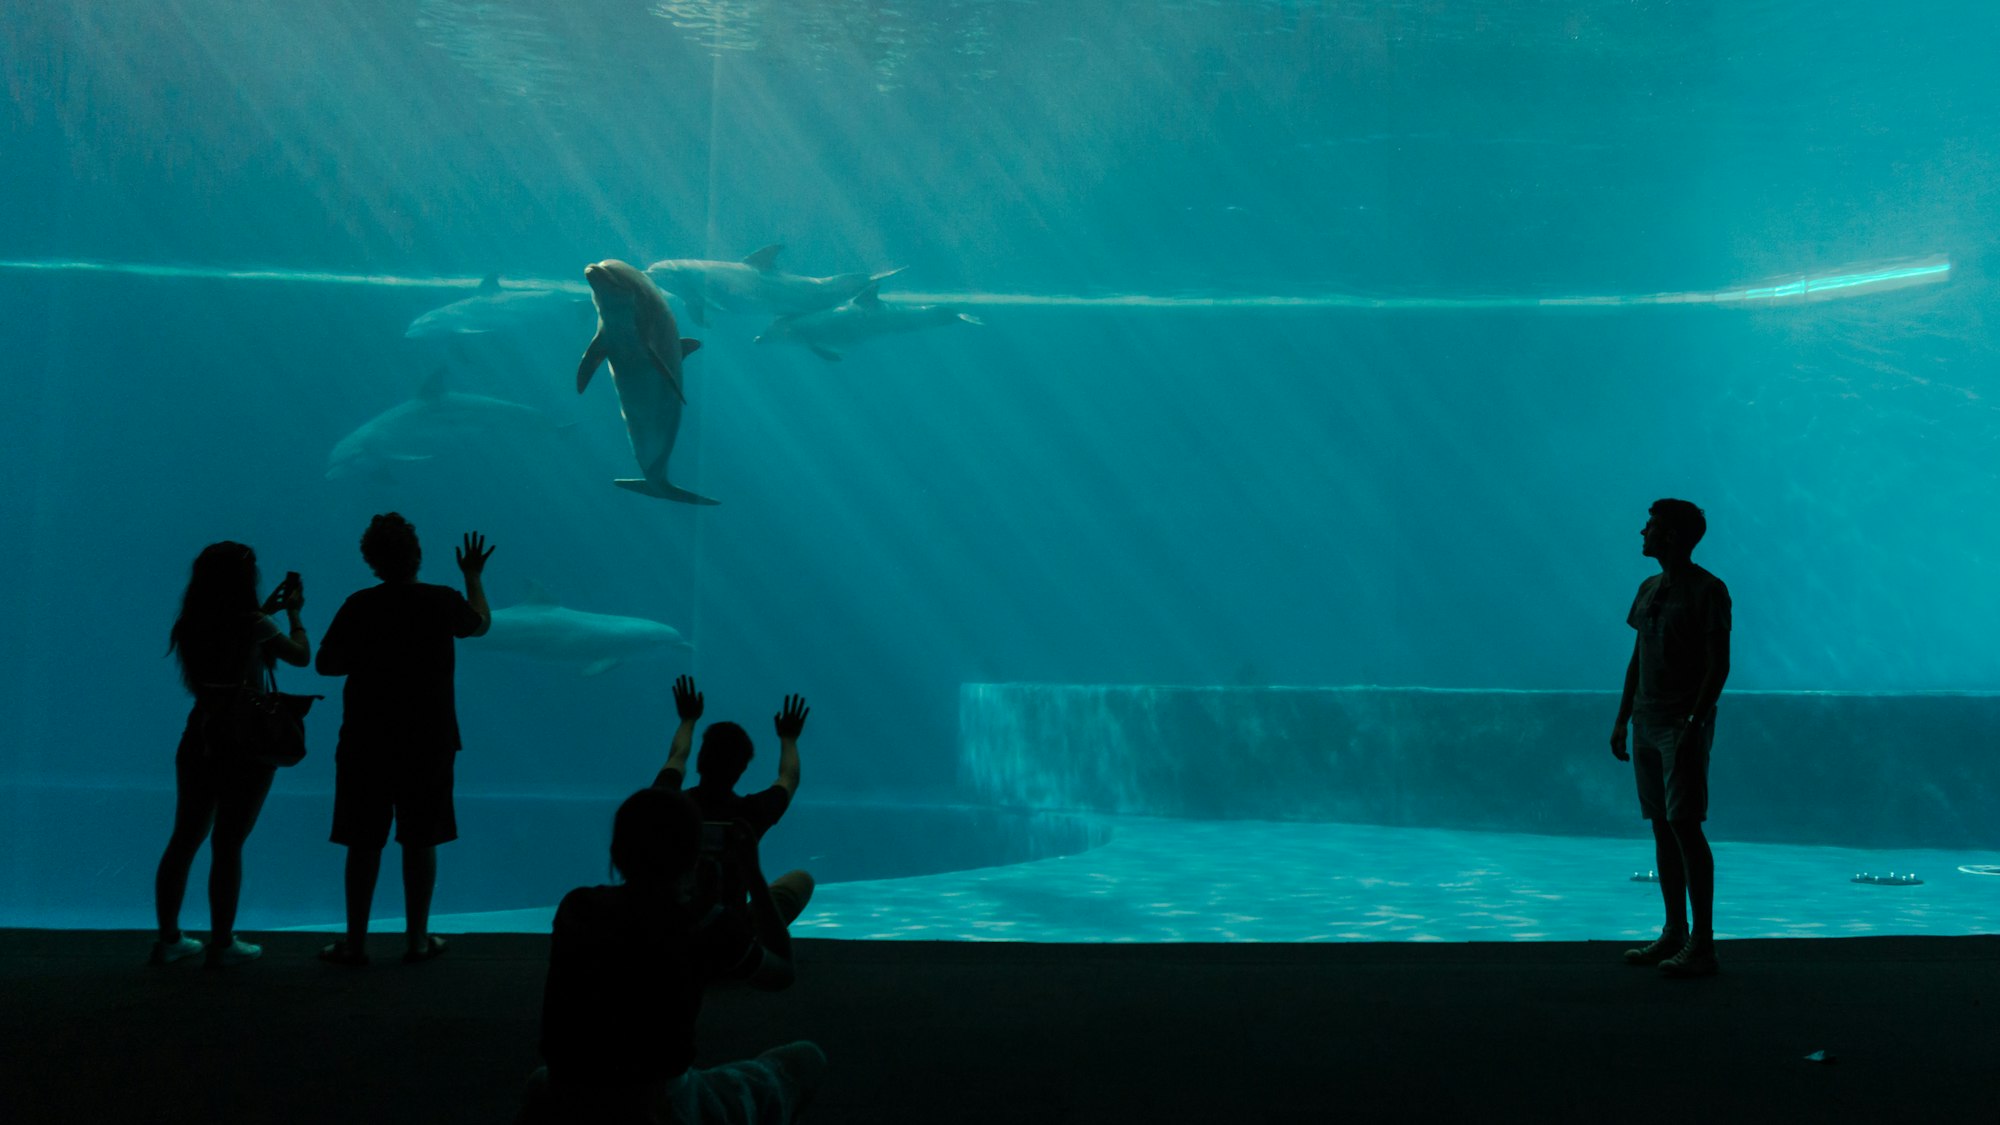 Shot at the Genoa Aquarium, Italy. I wanted to catch the wide scene with silhouettes of the people reacting to the animals. In addition, the light came through the water for some nice stripes coming down from the top left.